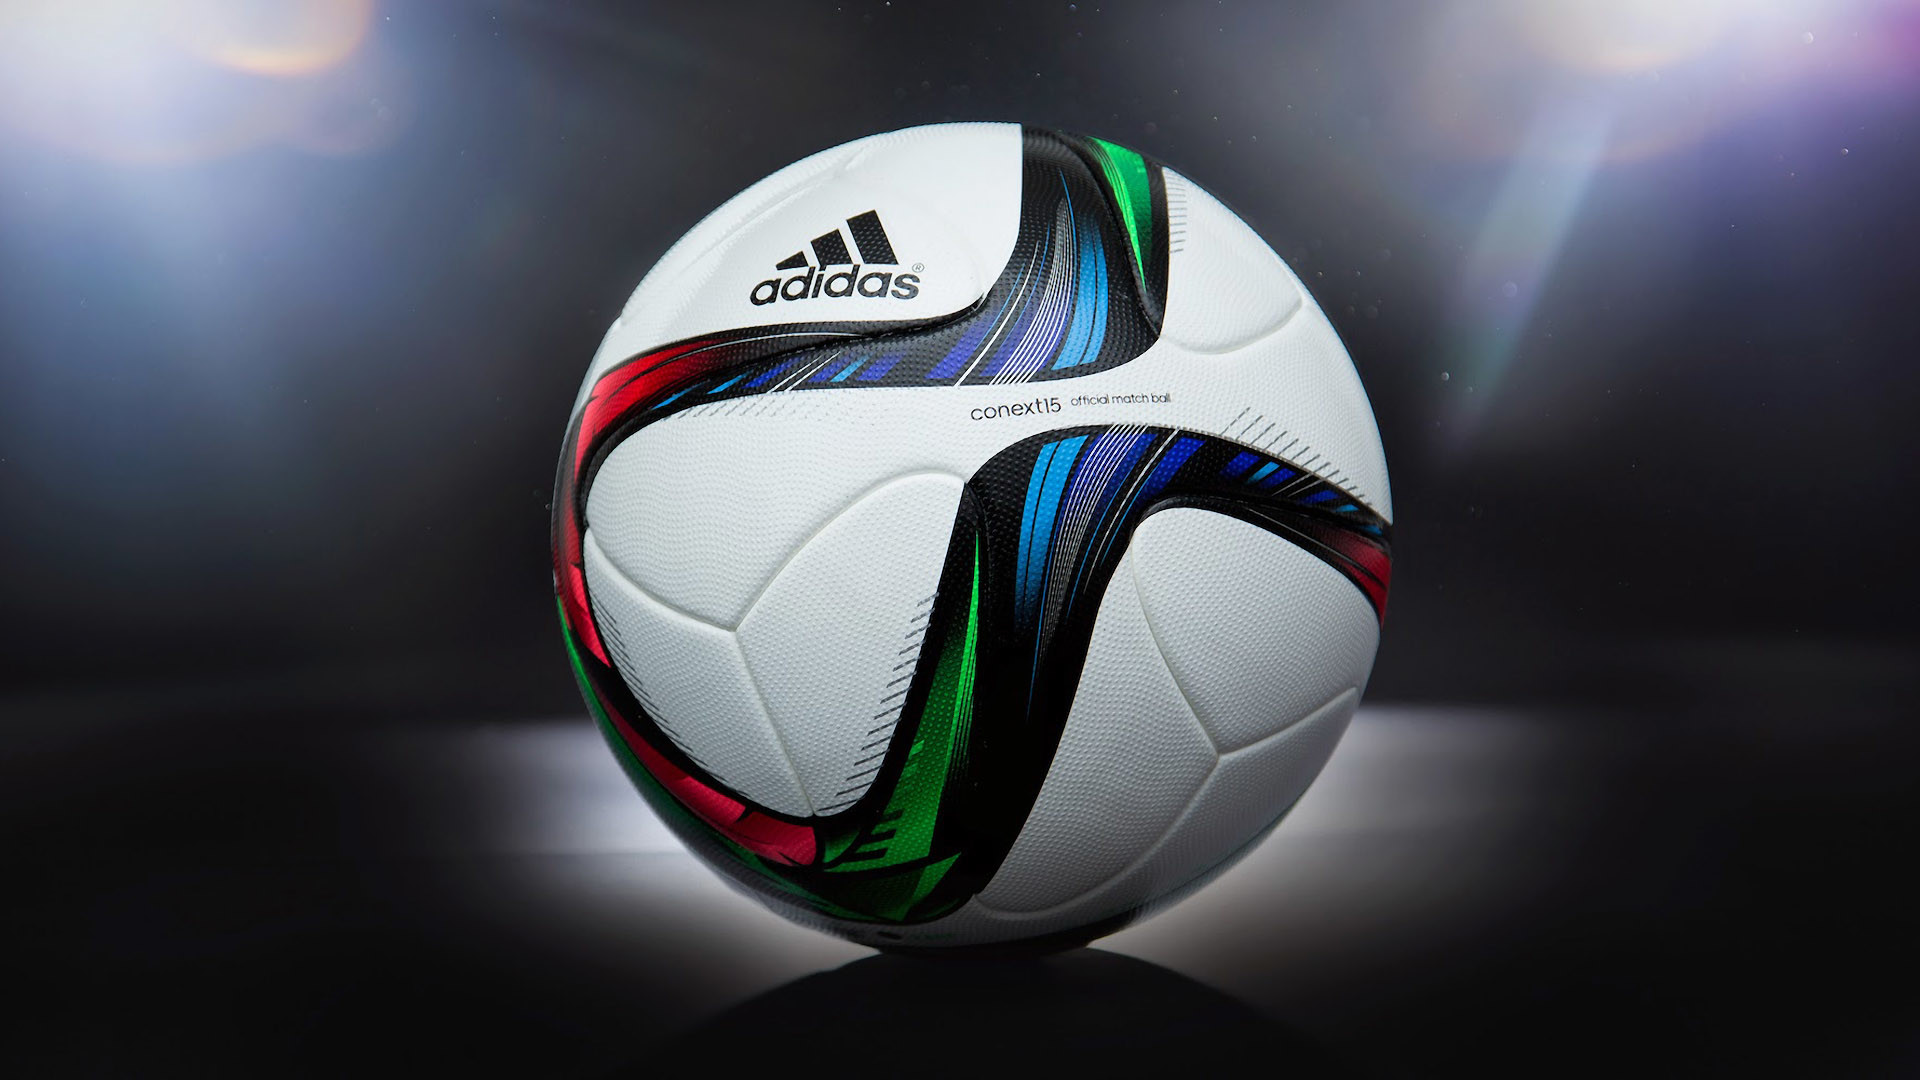 1920x1080 adidas conext soccer wallpaper desktop images download free windows  wallpapers amazing colourful 4k artwork lovely 1920Ã1080 Wallpaper HD